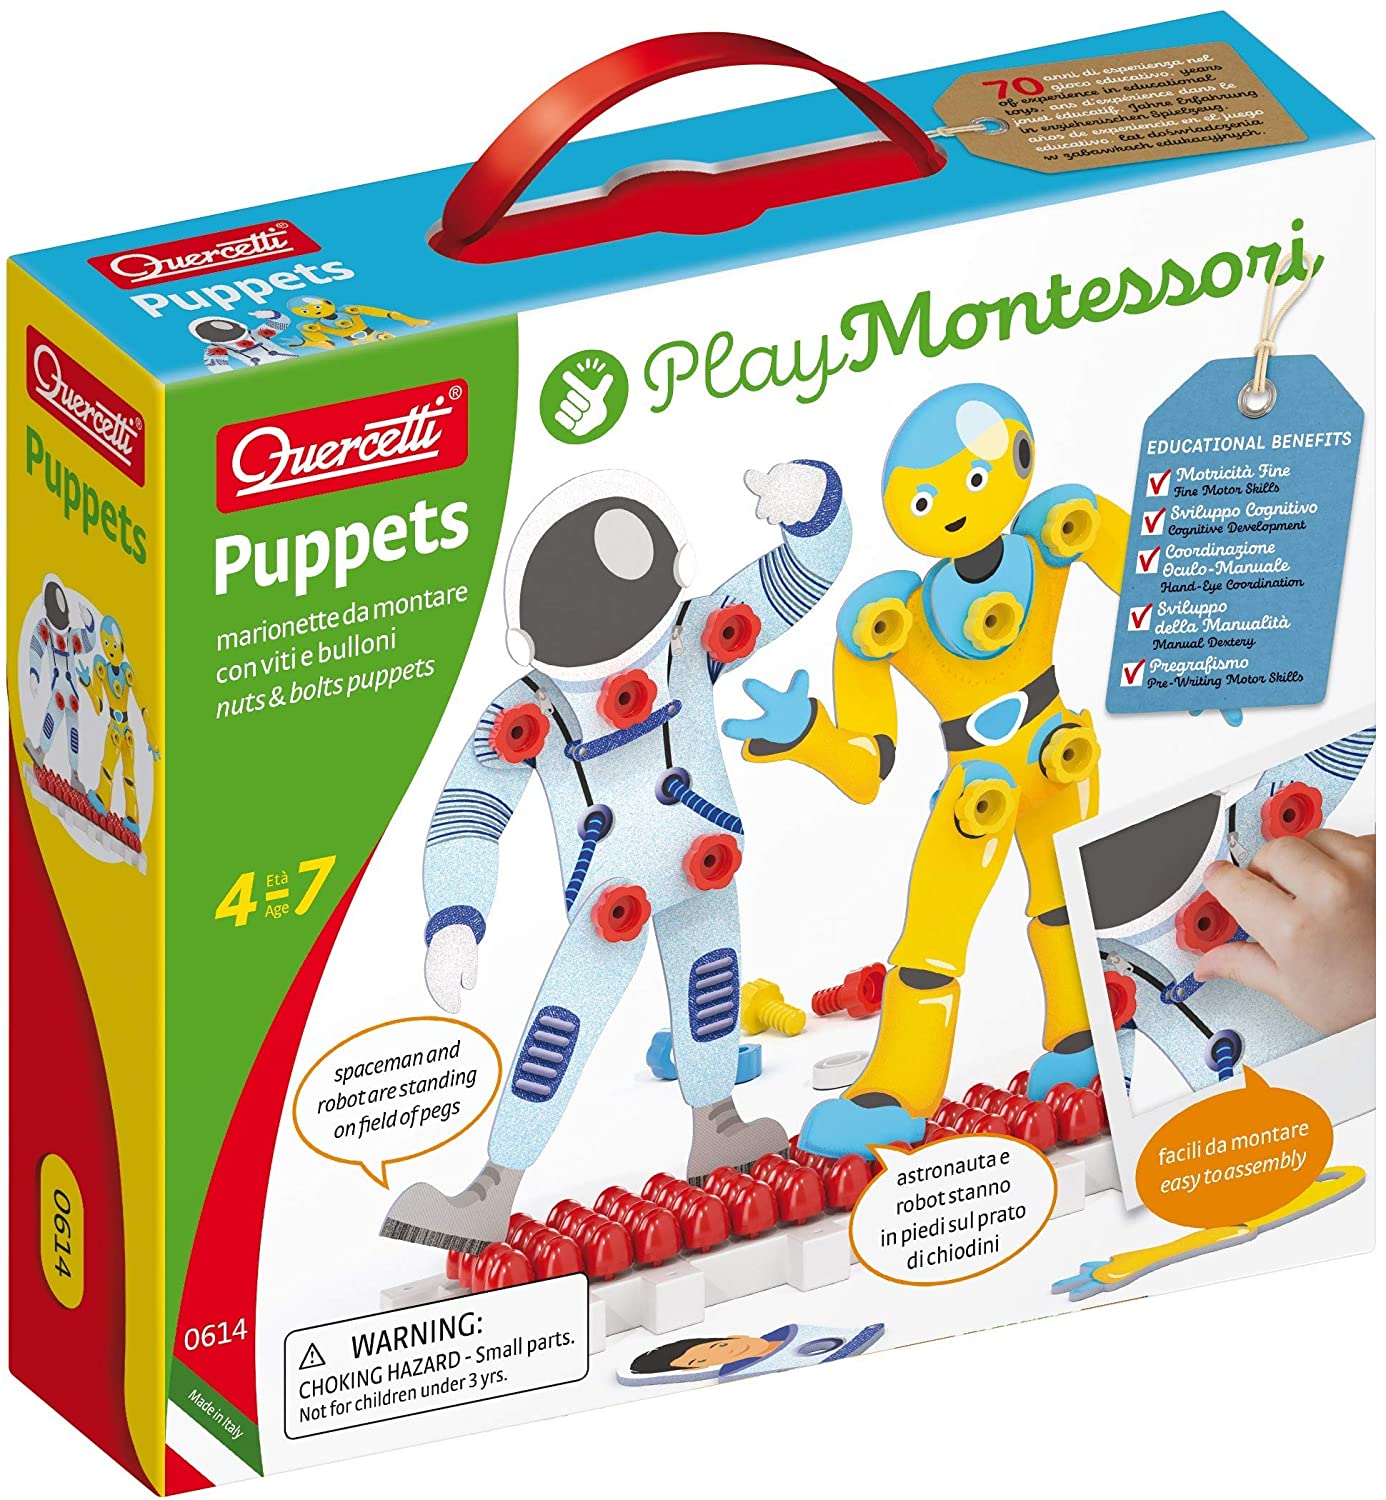 Quercetti Play Montessori Puppets Astronauta And Robot Mount Puppets